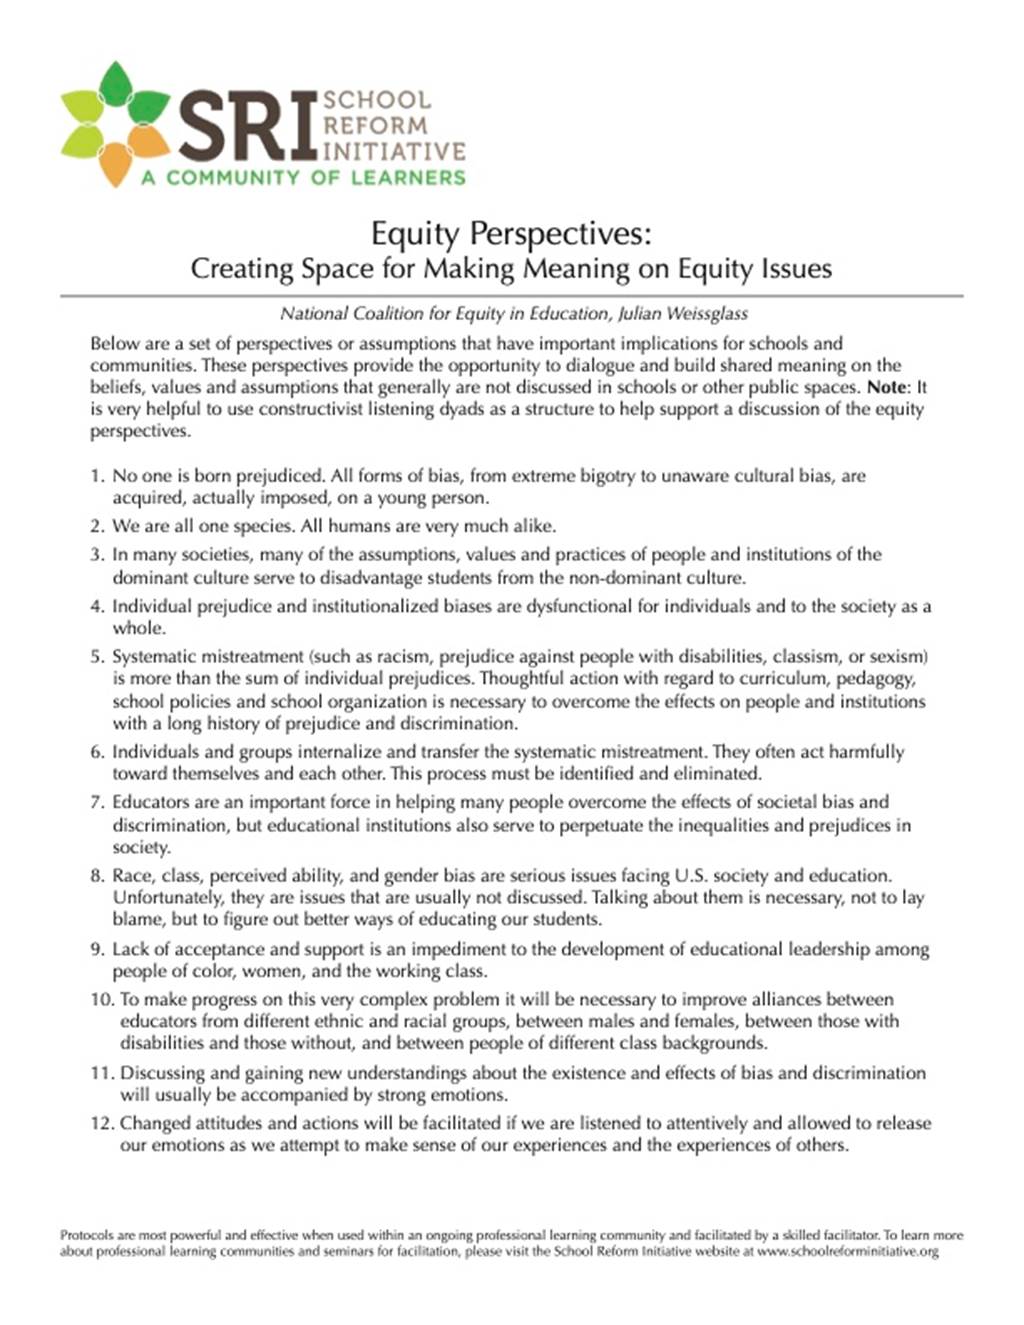 Equity Perspectives: Creating Space for Making Meaning on Equity Issues - Document Image